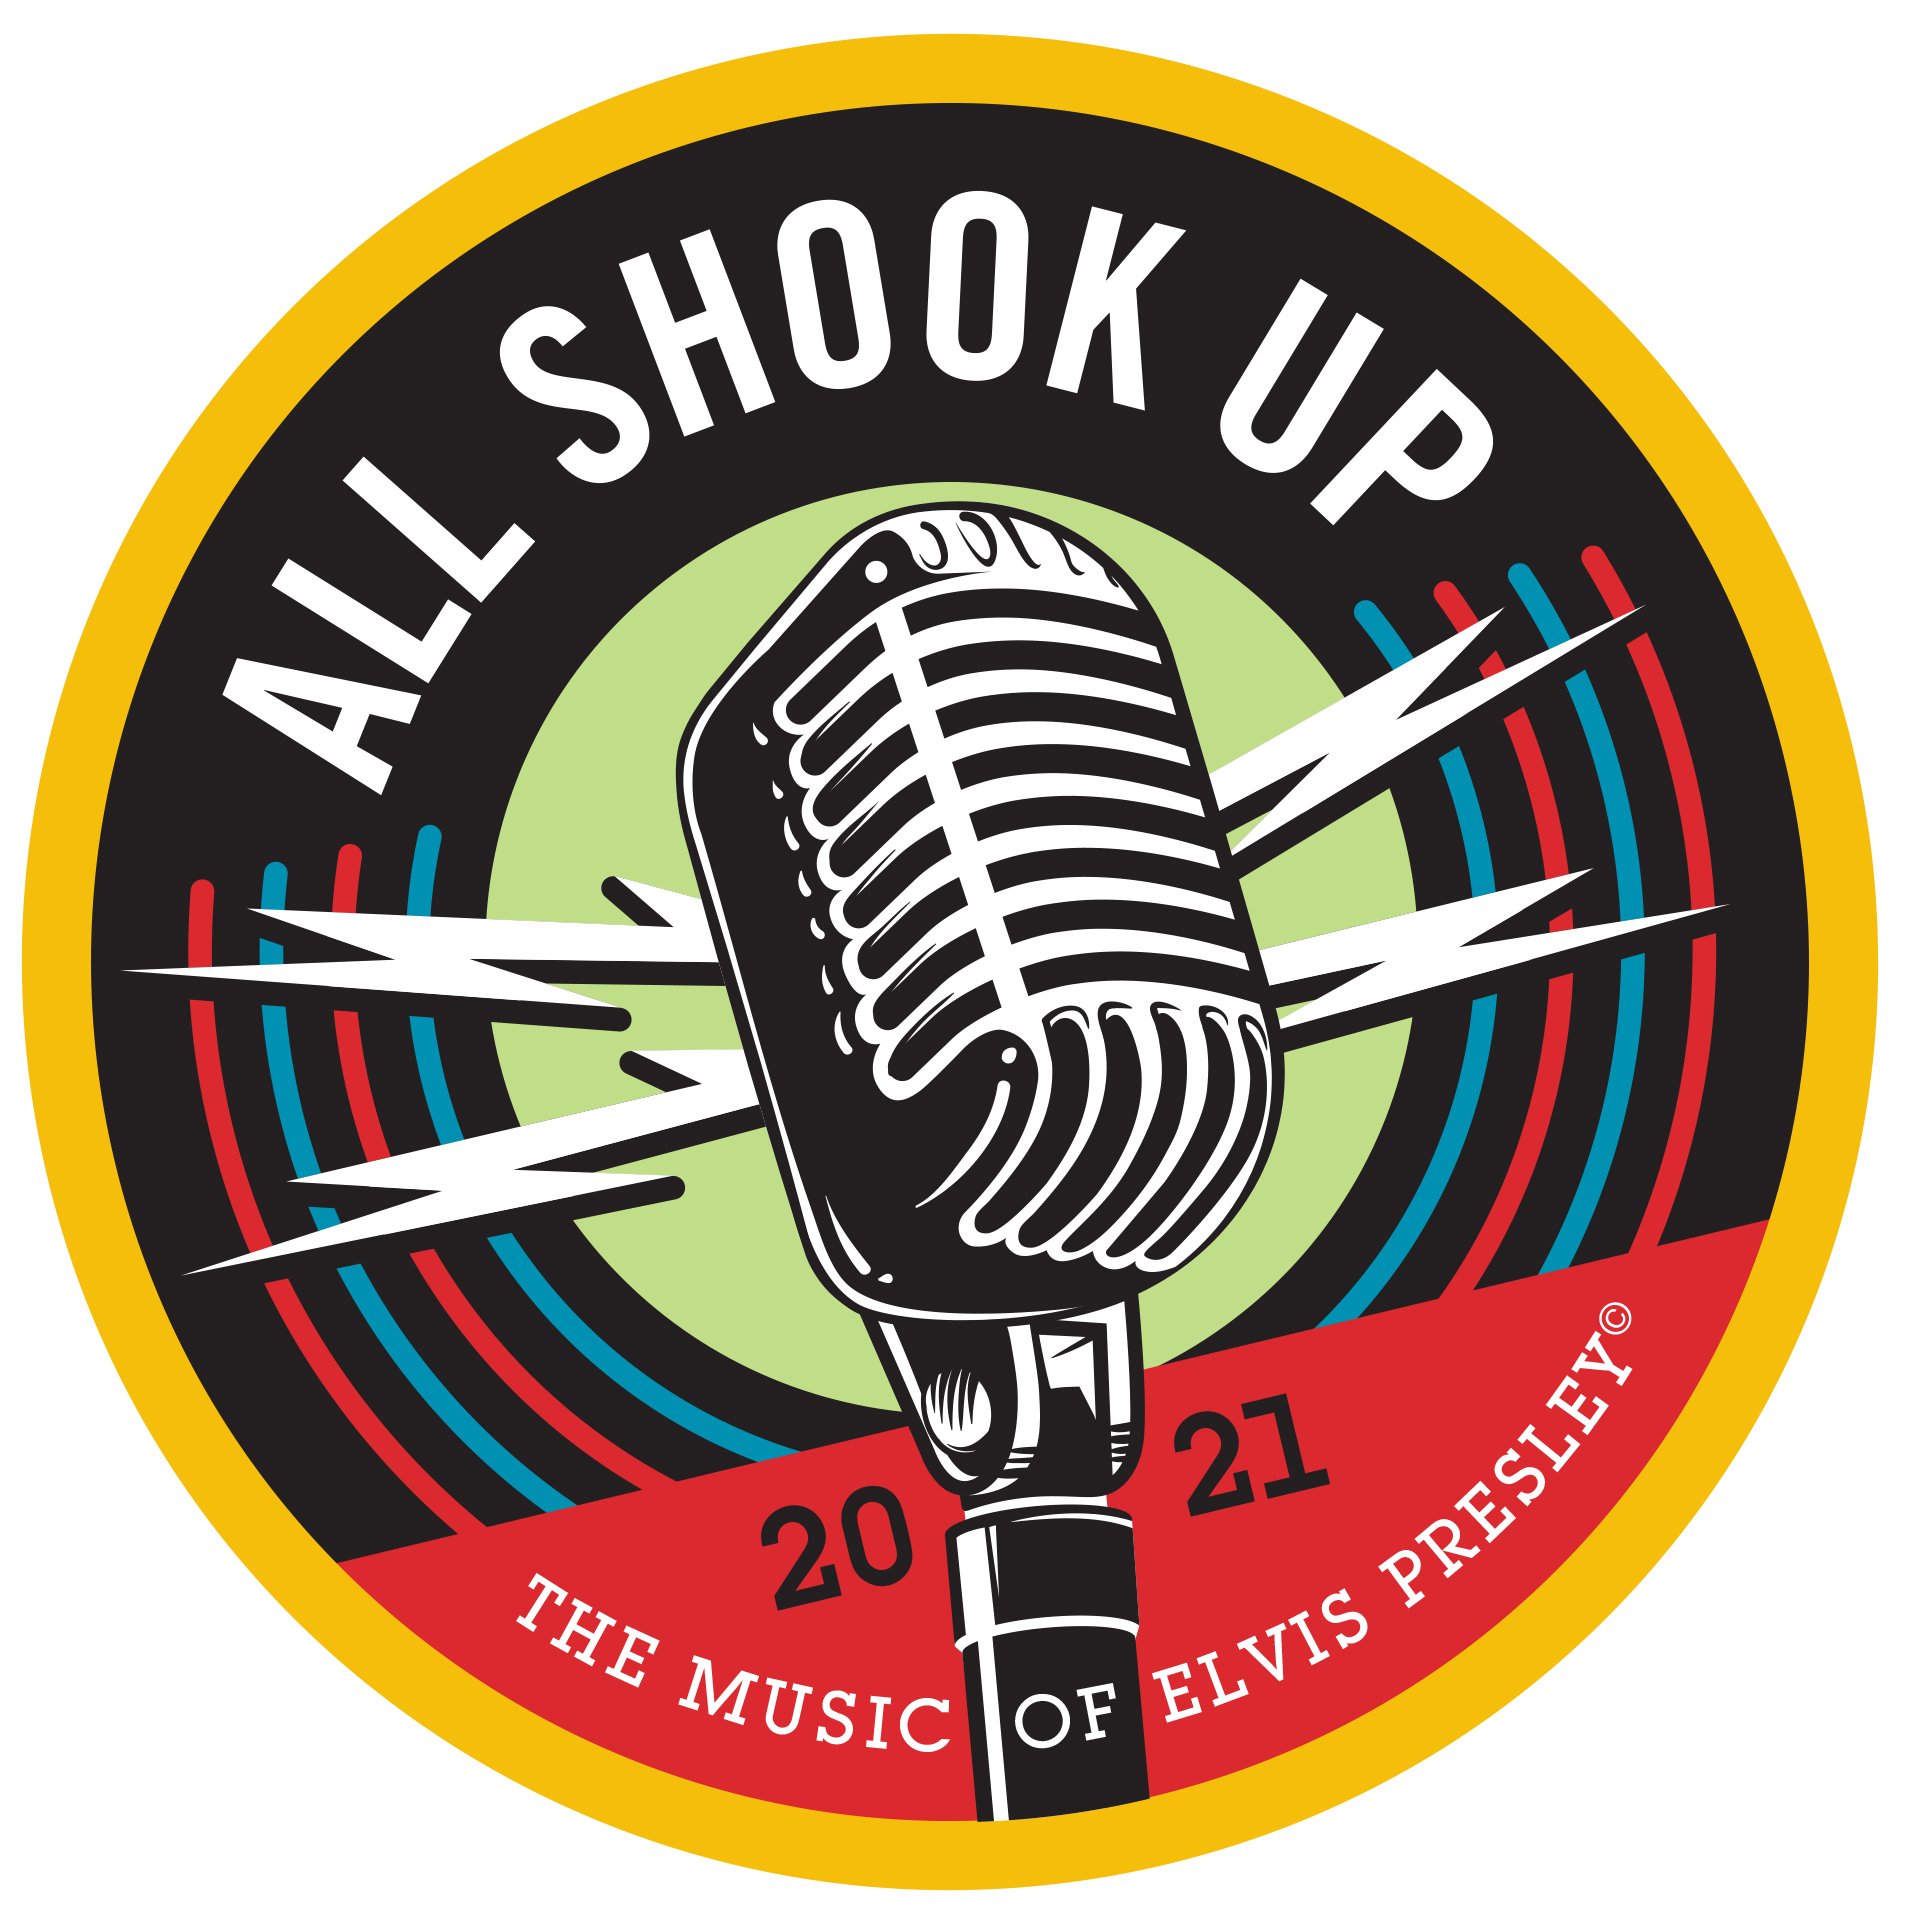 Tickets on sale now for All Shook Up, a musical comedy